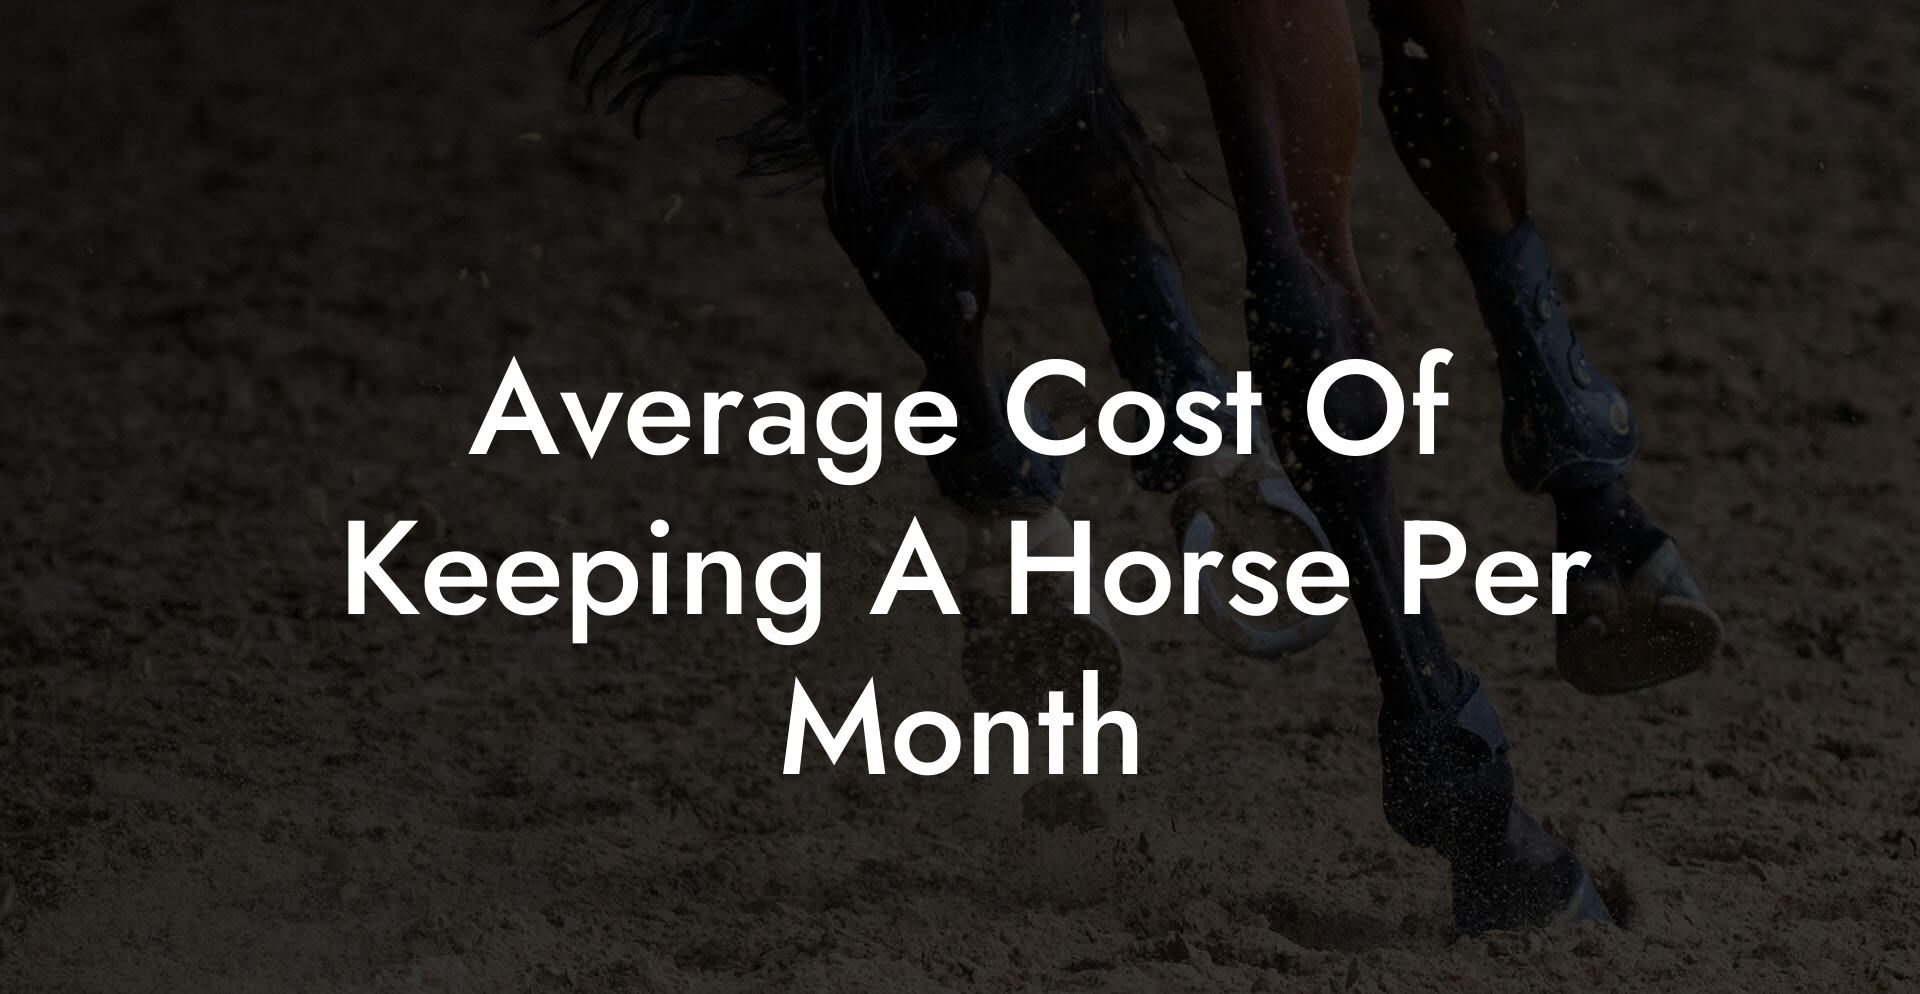 Average Cost Of Keeping A Horse Per Month